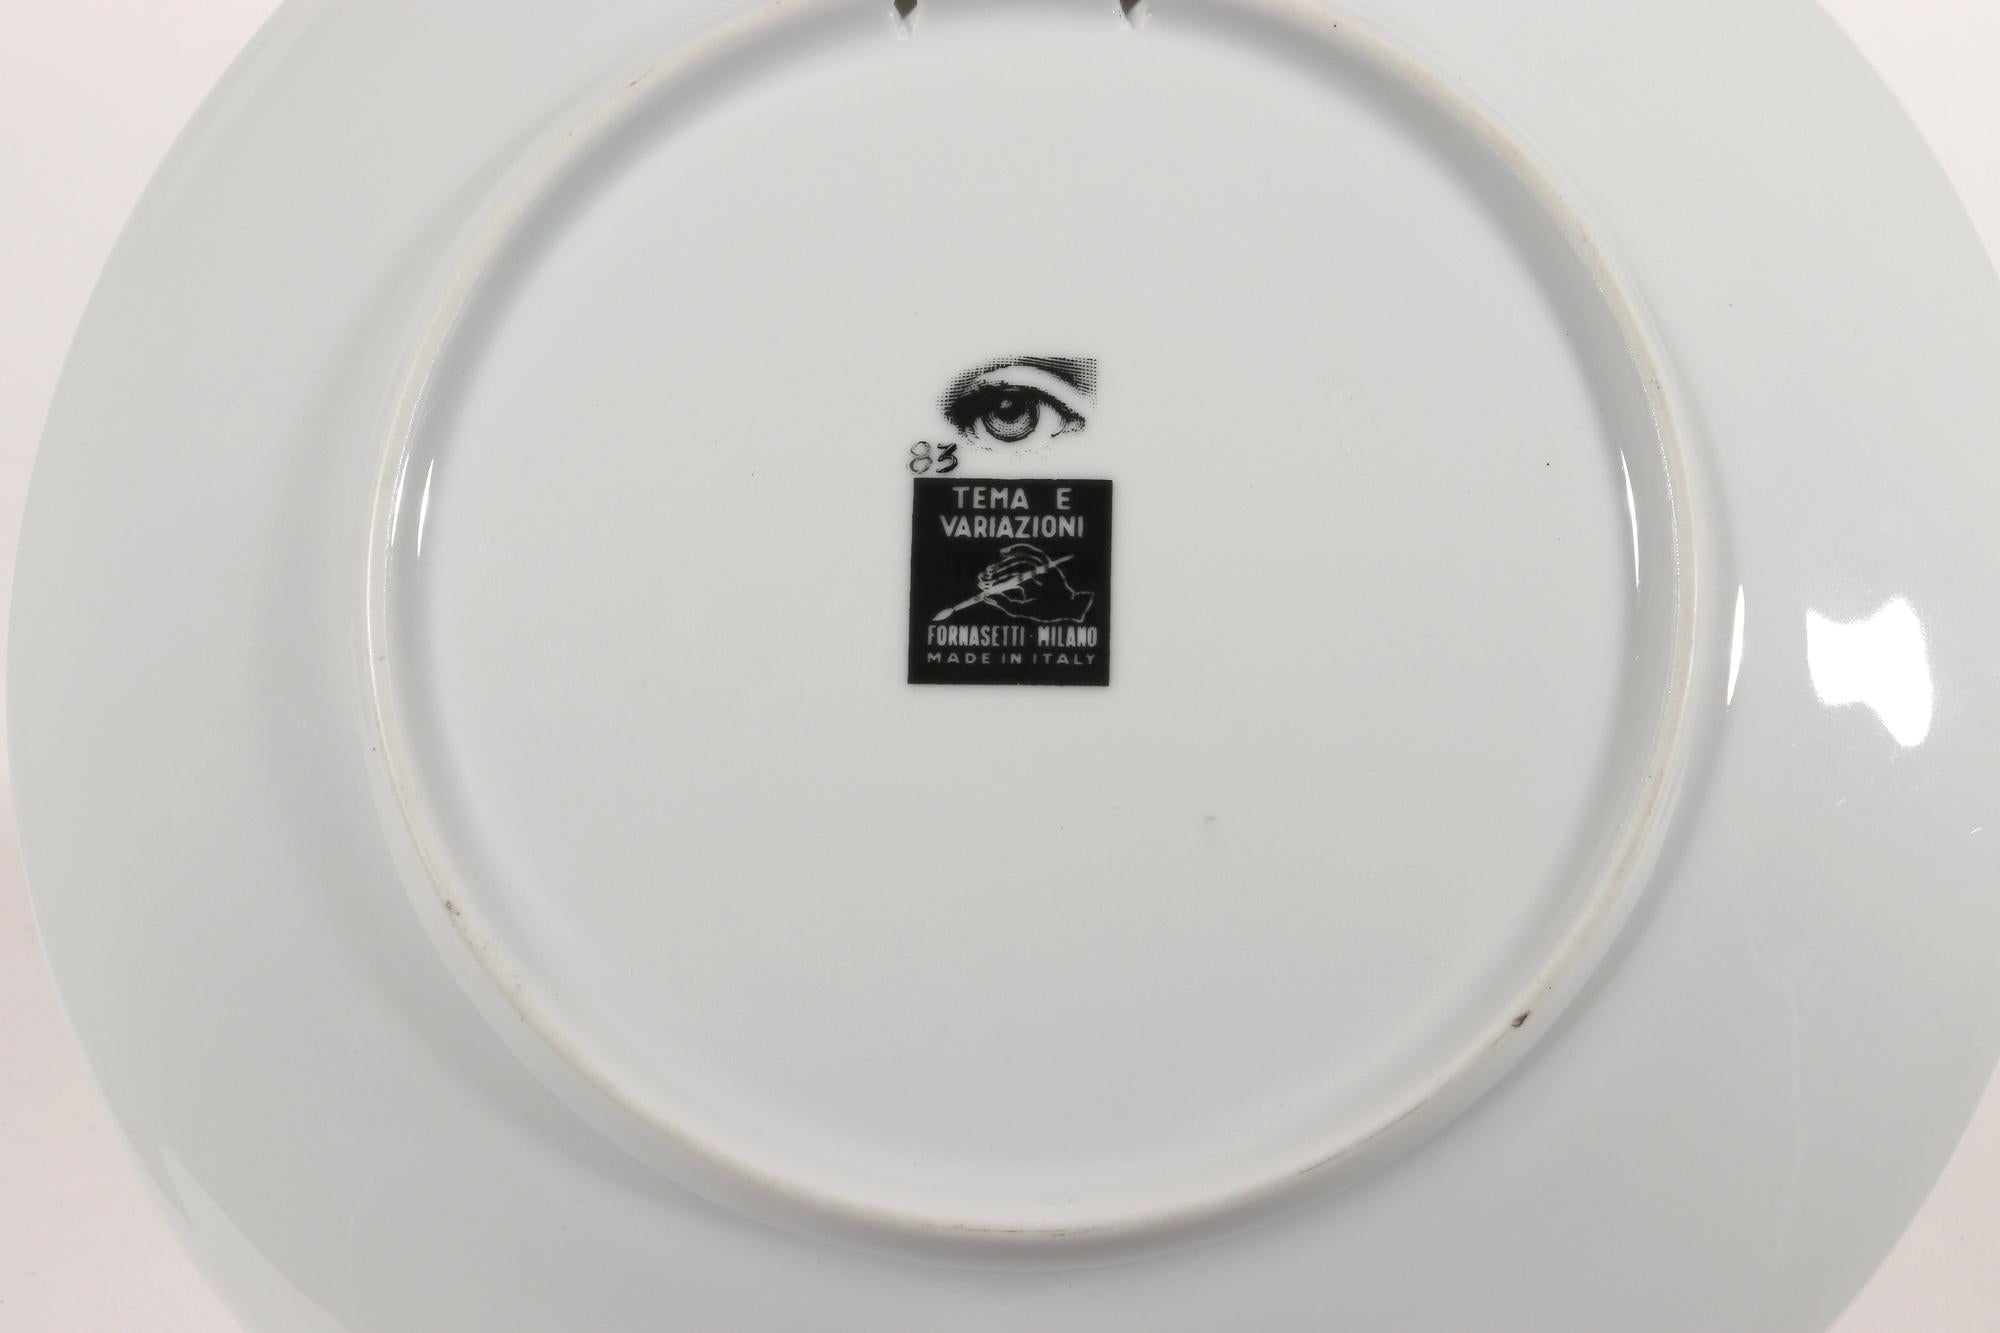 Mid-Century Modern Fornasetti Porcelain Surrealist Themes & Variation Plate, #83 For Sale